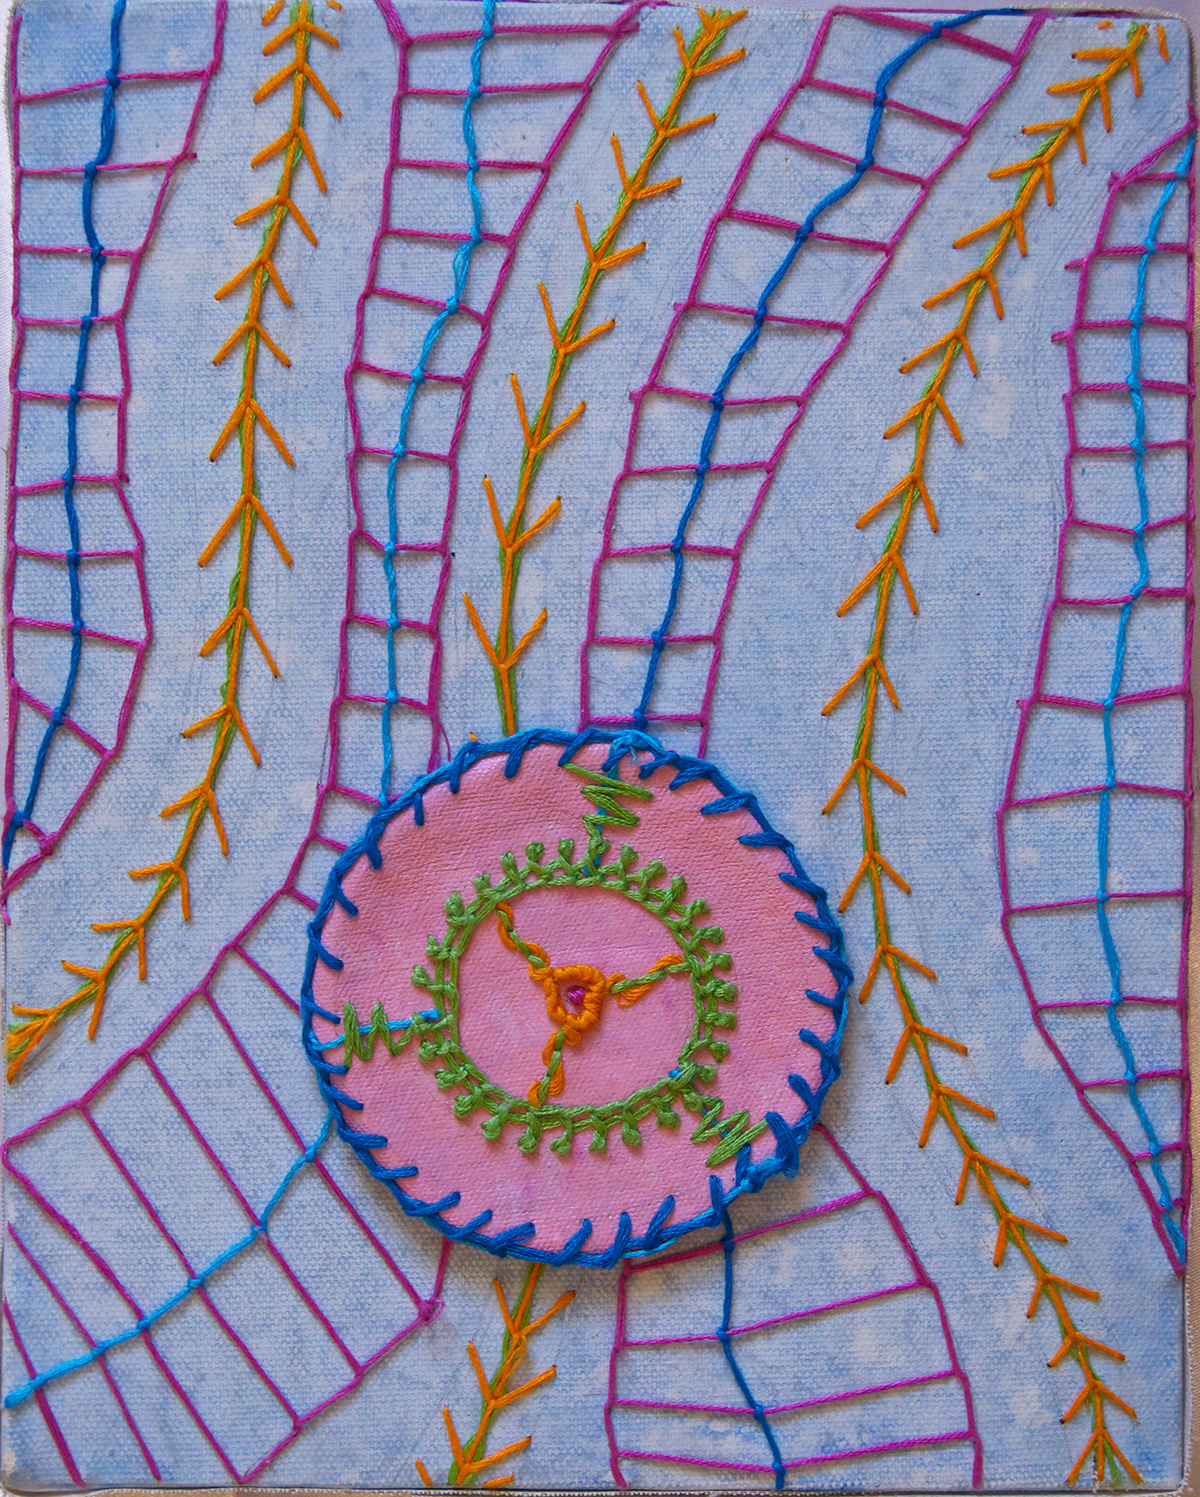 Embroidery self portrait series color design abstract